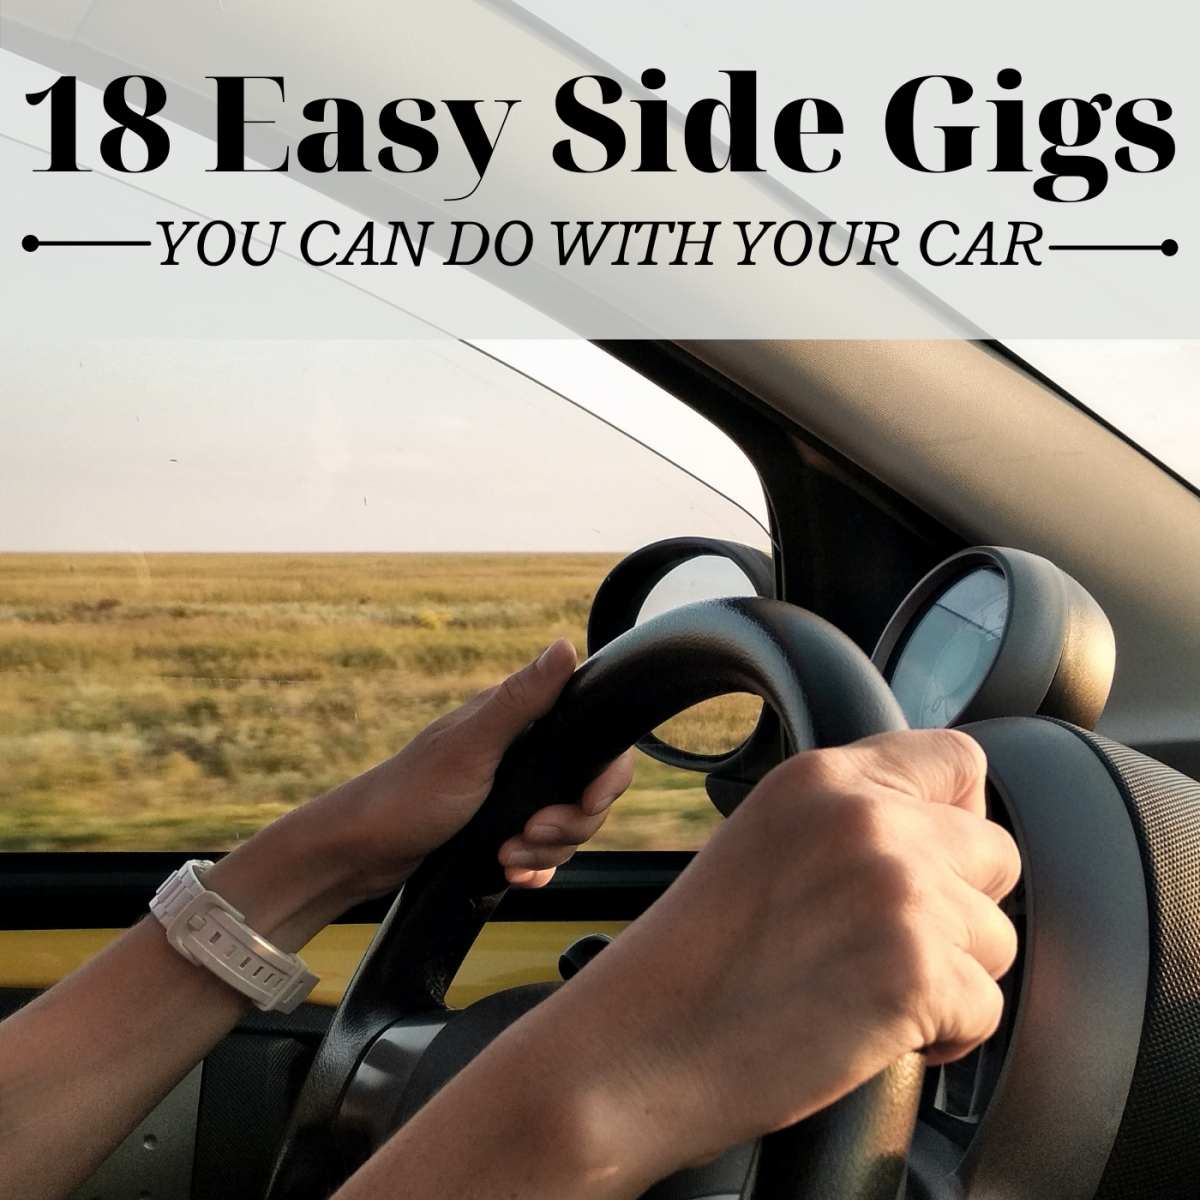 18 Ways to Make Money With Your Car